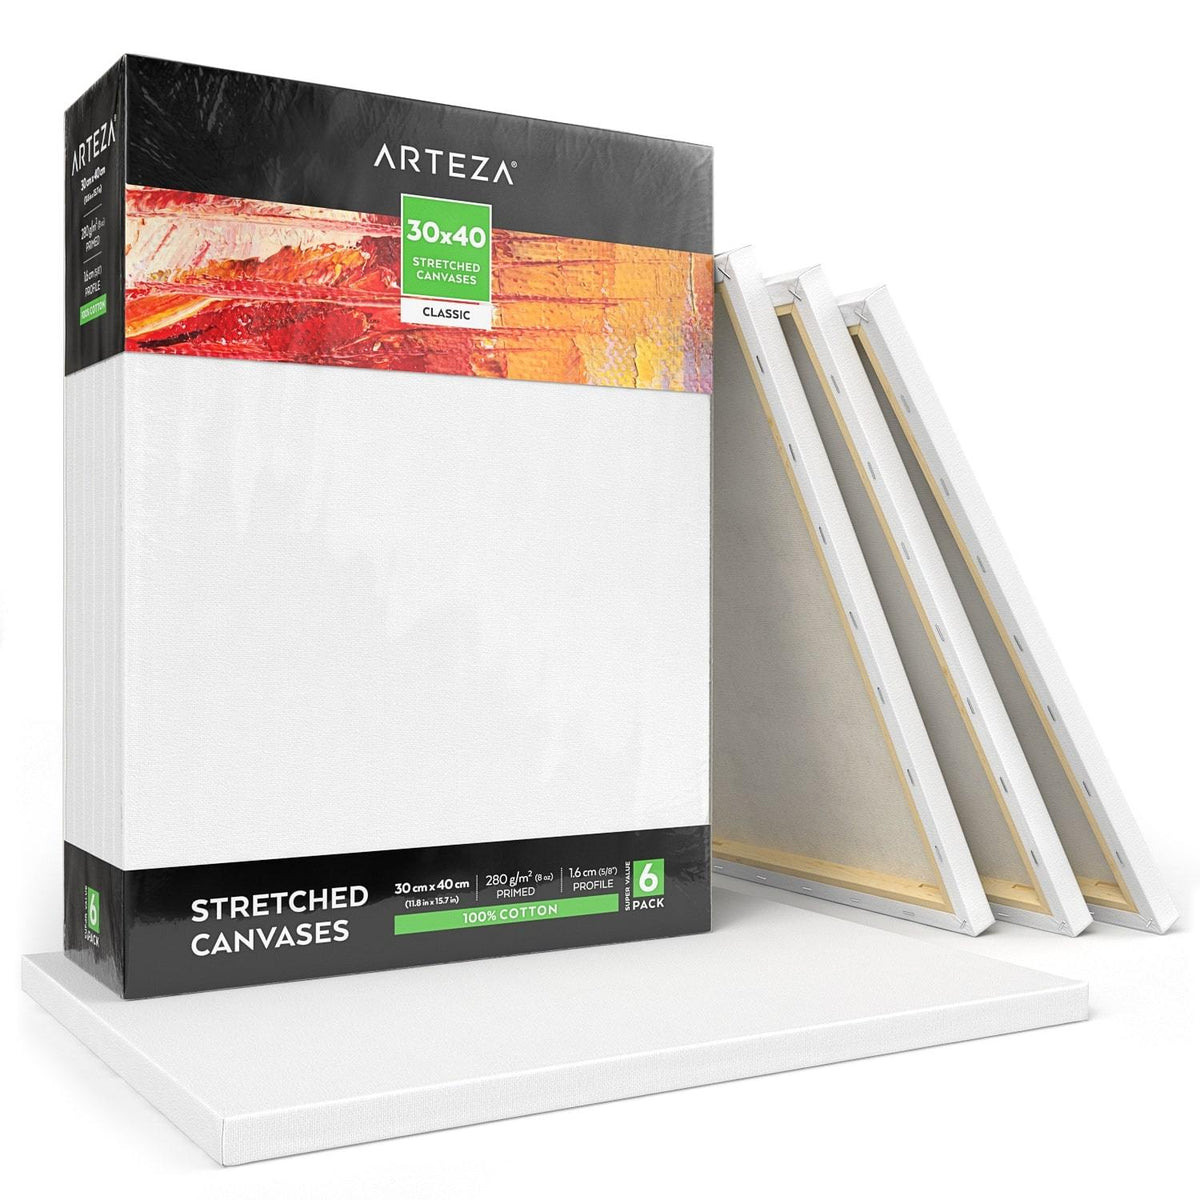  Stretched Canvases for Painting 8 Pack 8x10 Inch, 100% Cotton  12.3 oz Triple Primed Painting Canvas, 3/4 Profile Acid-Free Paint Canvas  Blank Canvas for Acrylic Pouring Oil Watercolor Painting